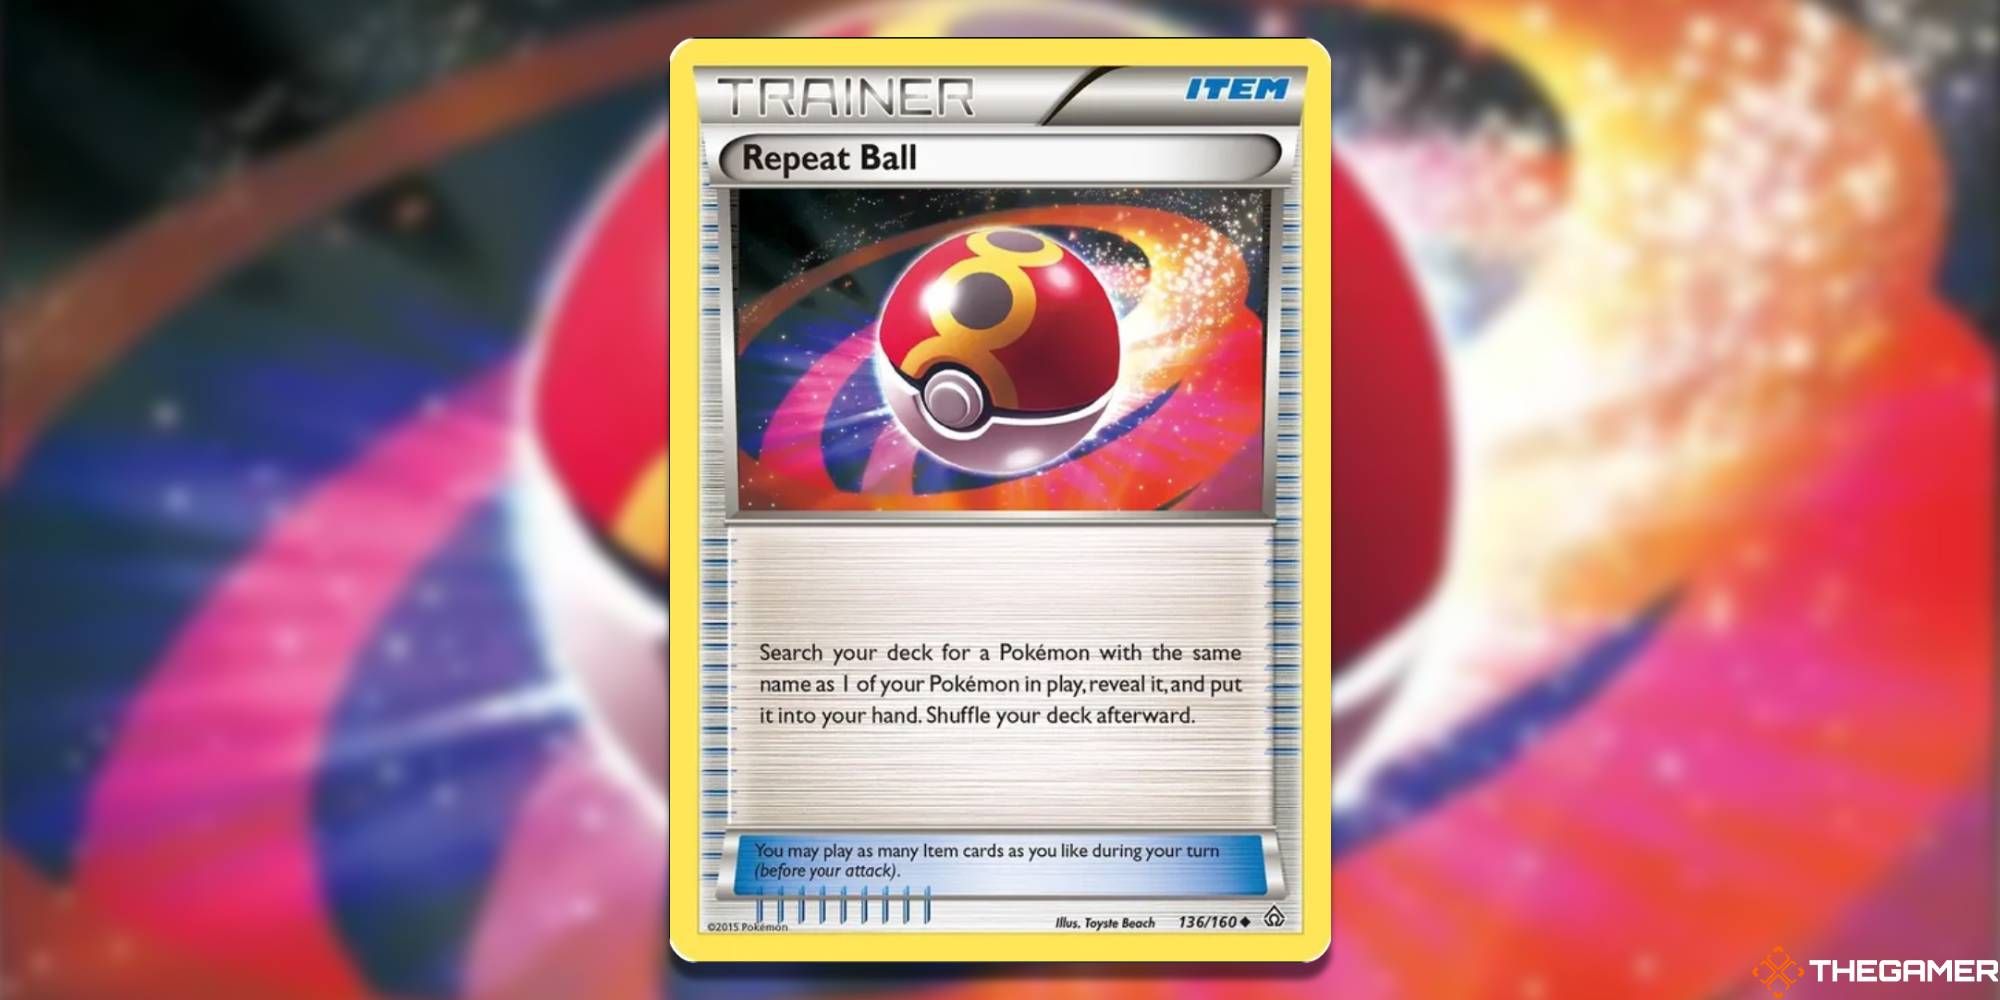 Repeat Ball from the Pokemon TCG, with blurred background